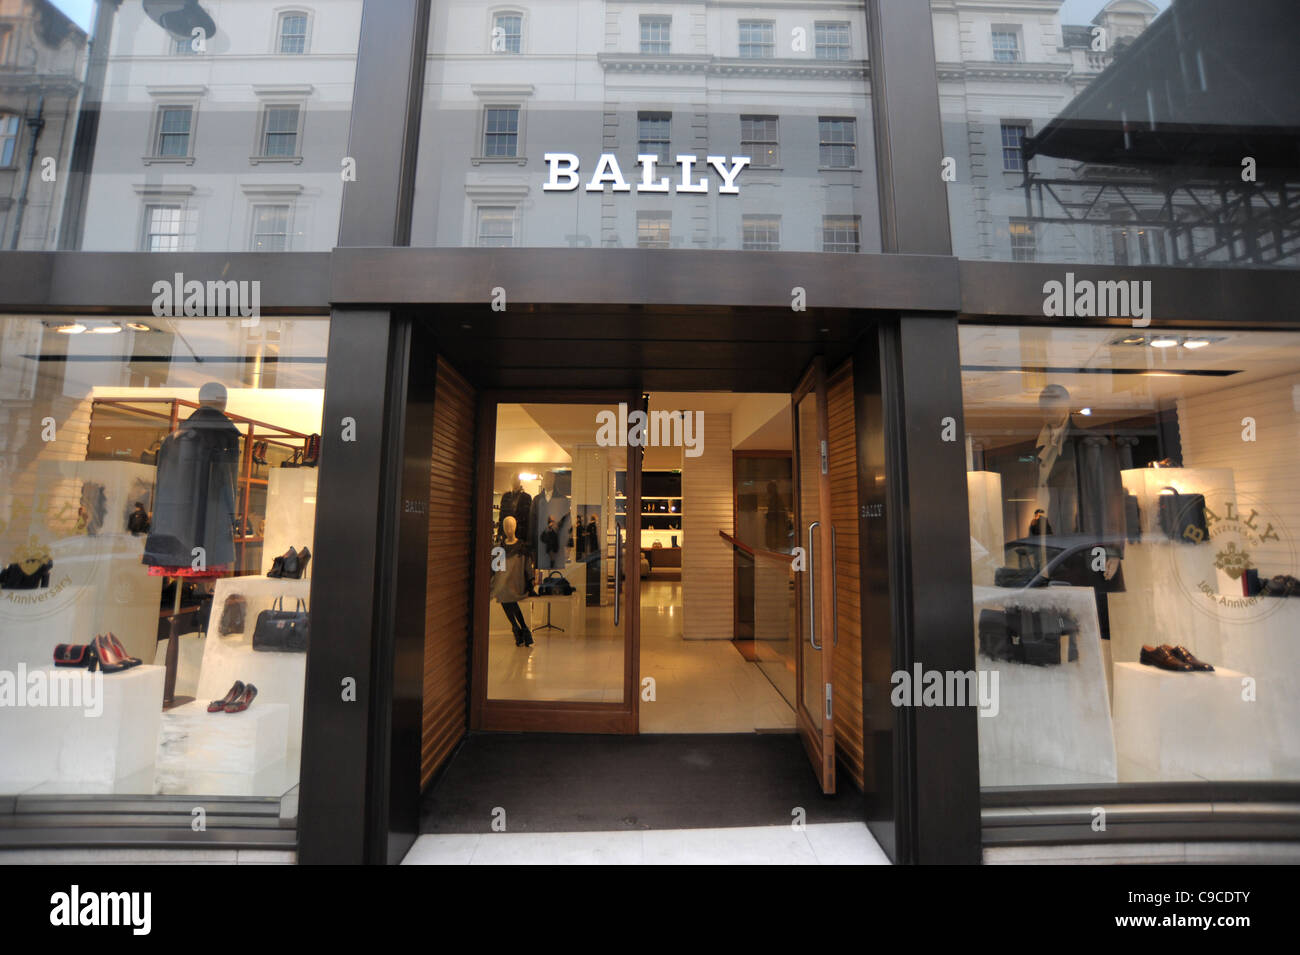 Bally Bally High Resolution Stock Photography and Images - Alamy